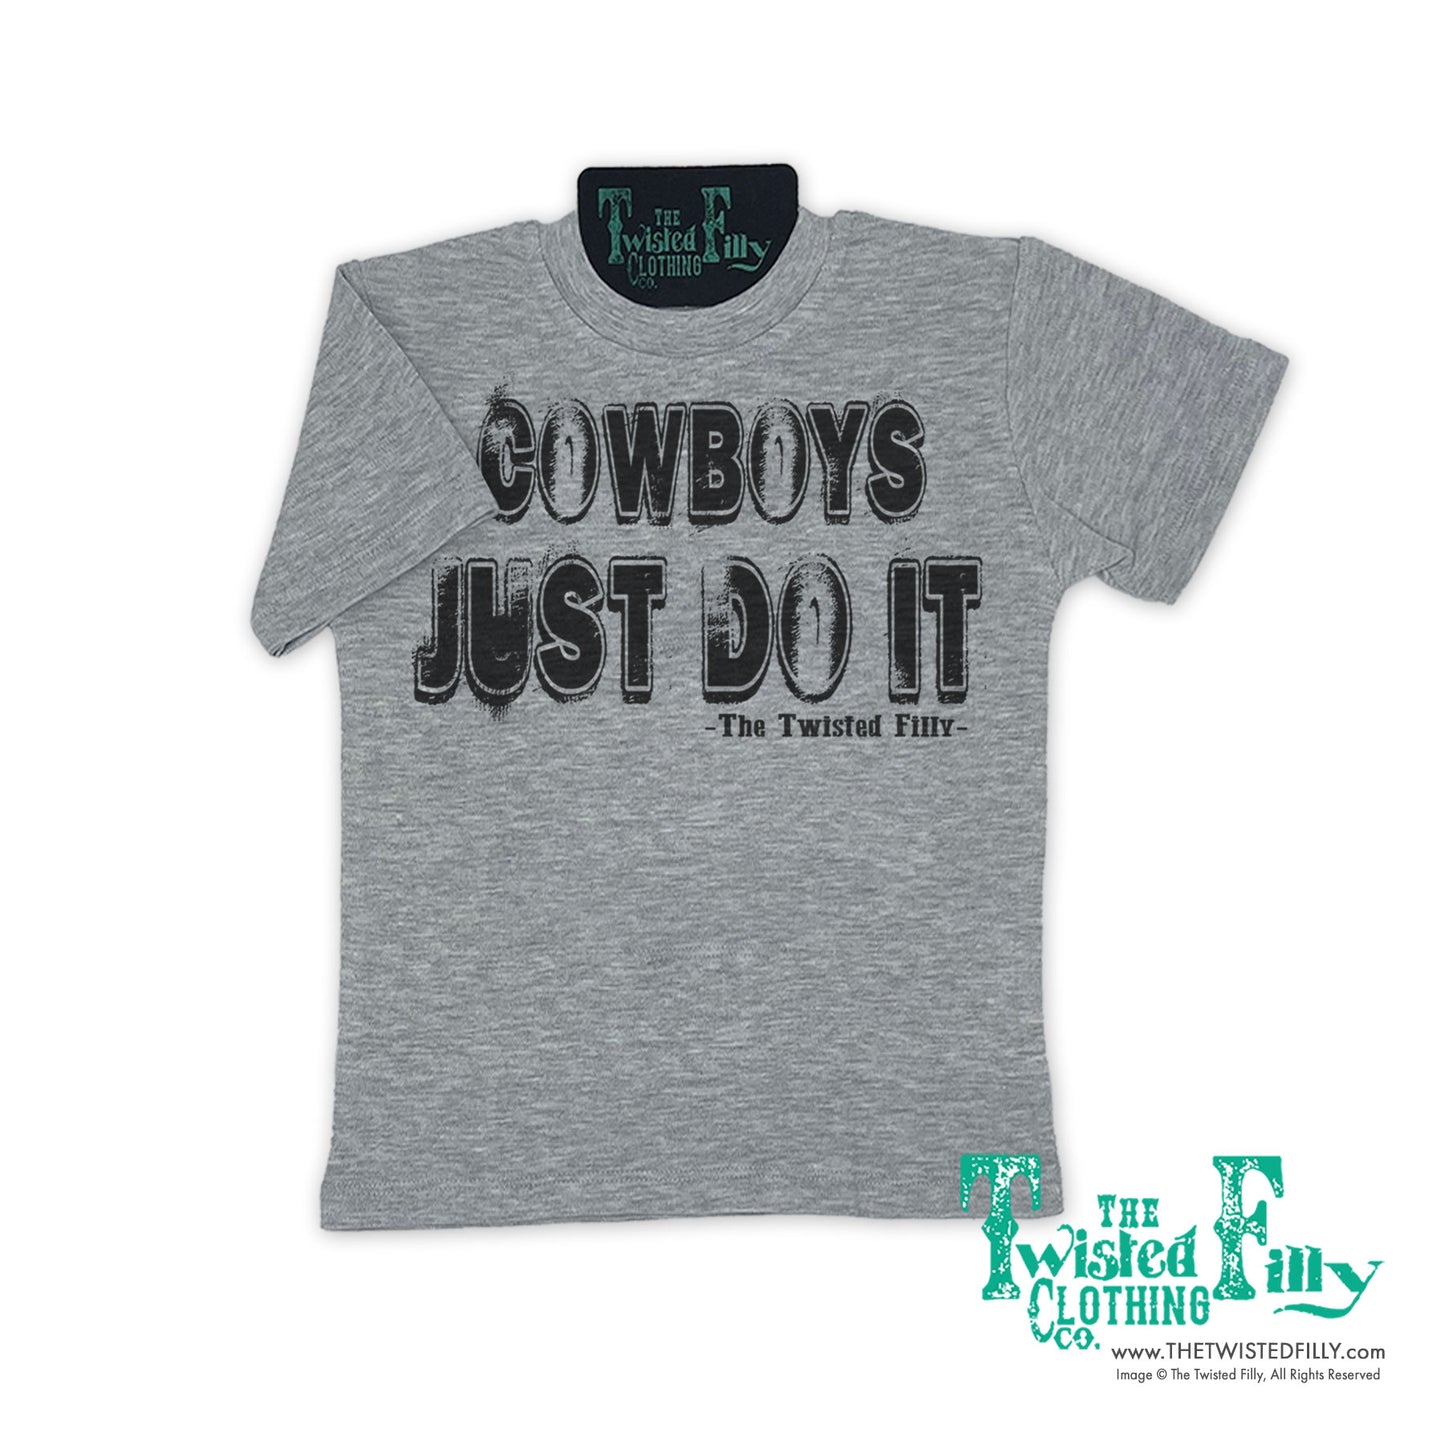 Cowboys Just Do It - S/S Boys Toddler Tee - Assorted Colors